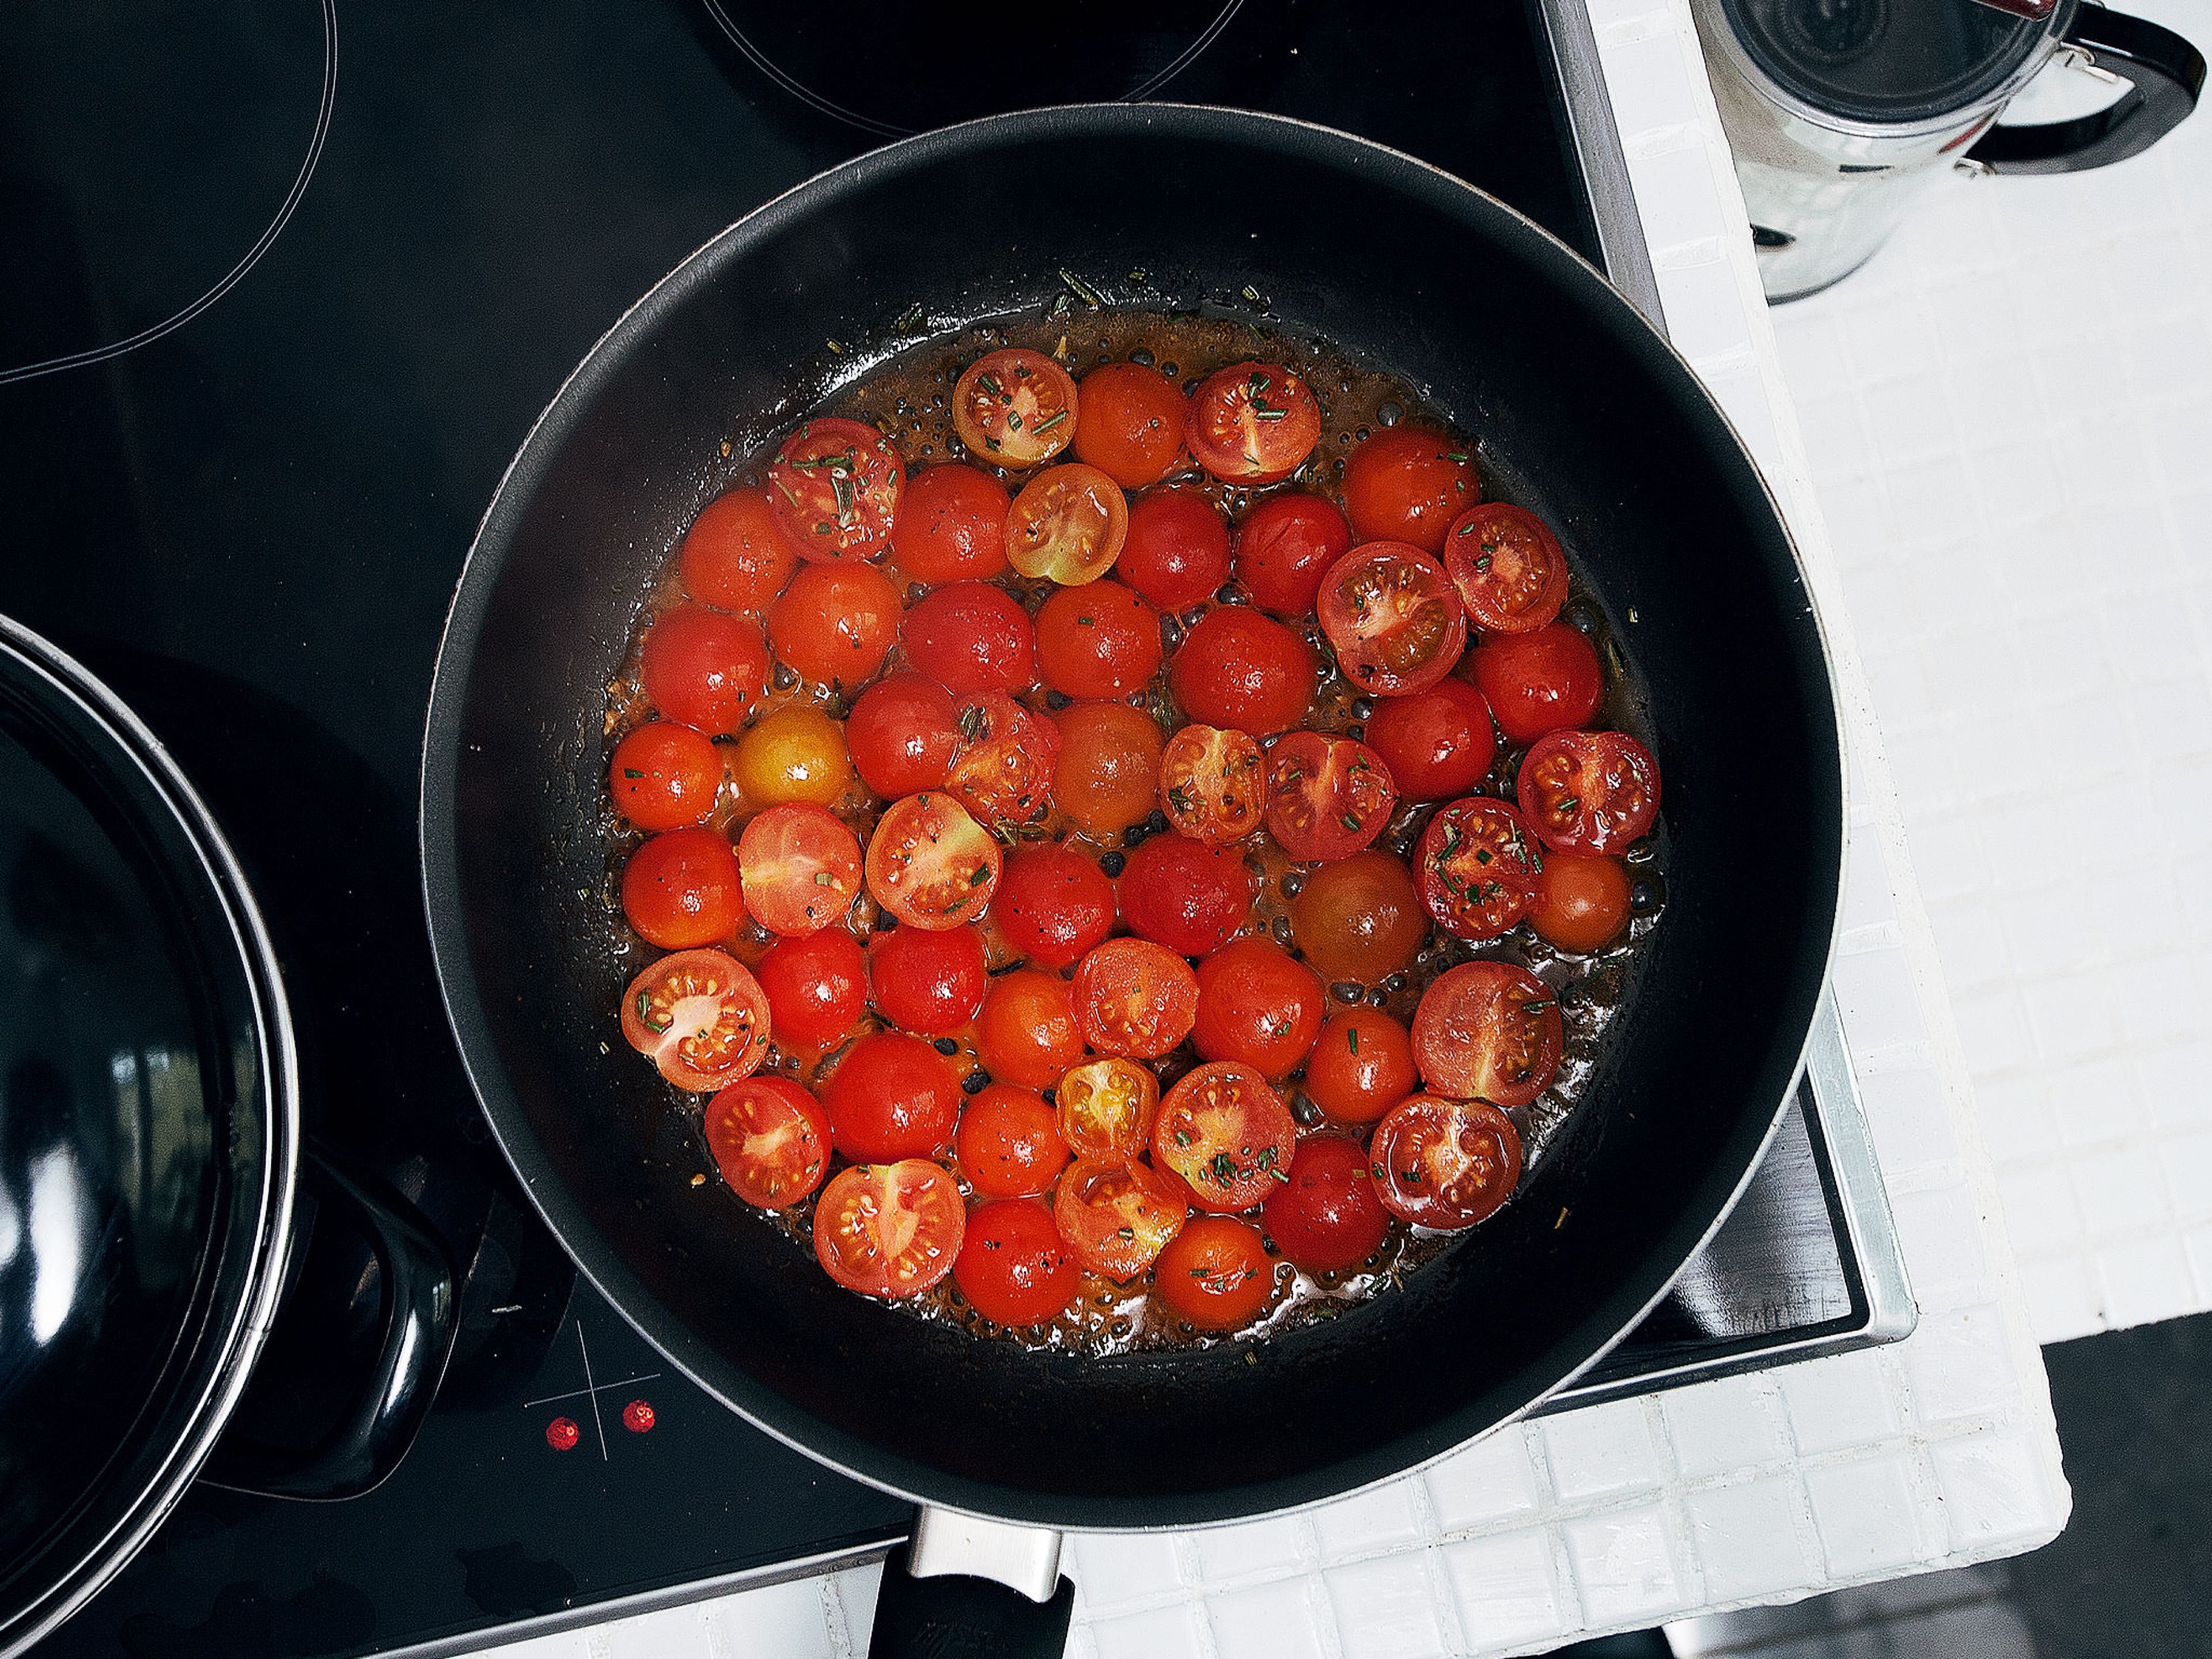 Cut tomatoes into halves. Pick rosemary from stem and roughly chop. Remove pit and peel avocado, cut into bite-sized cubes and set aside. Add olive oil to pan over medium-high heat. Add tomatoes, rosemary, and agave syrup and cook for approx. 15 mins. or until tomatoes thicken. Stir occasionally, then set aside.